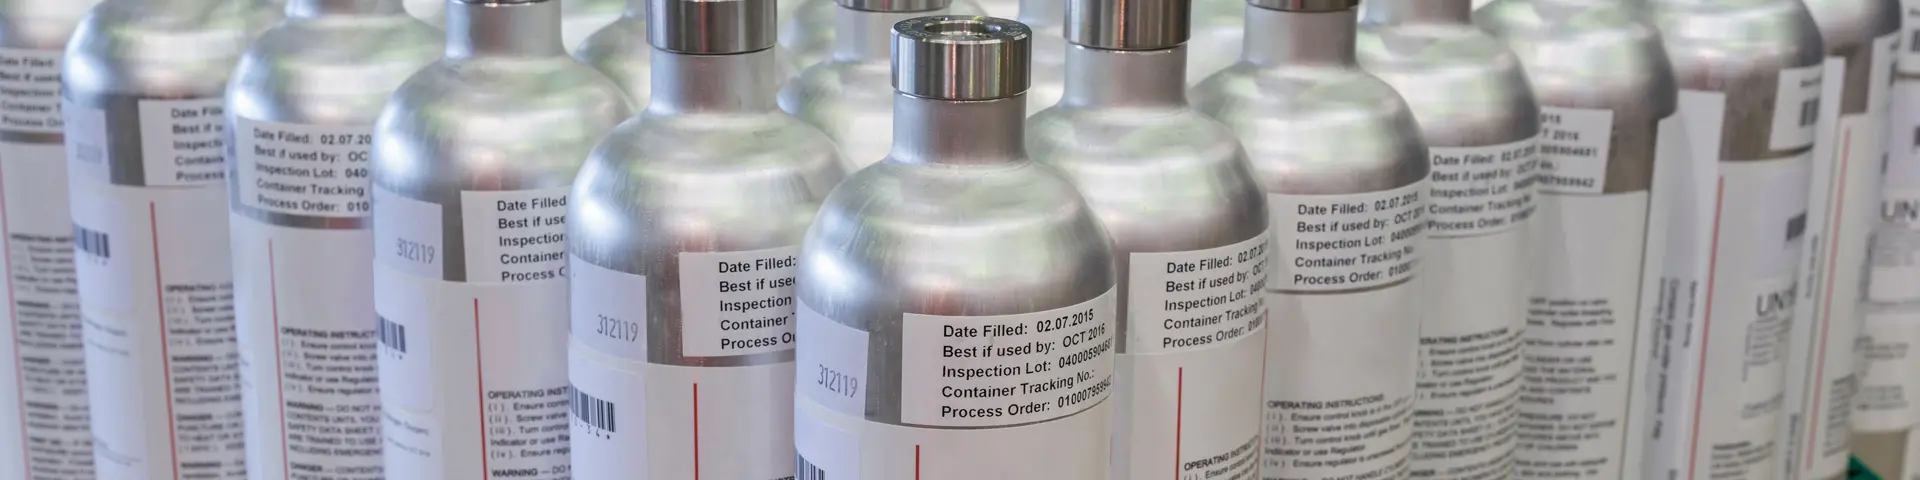 Calibration gas canisters